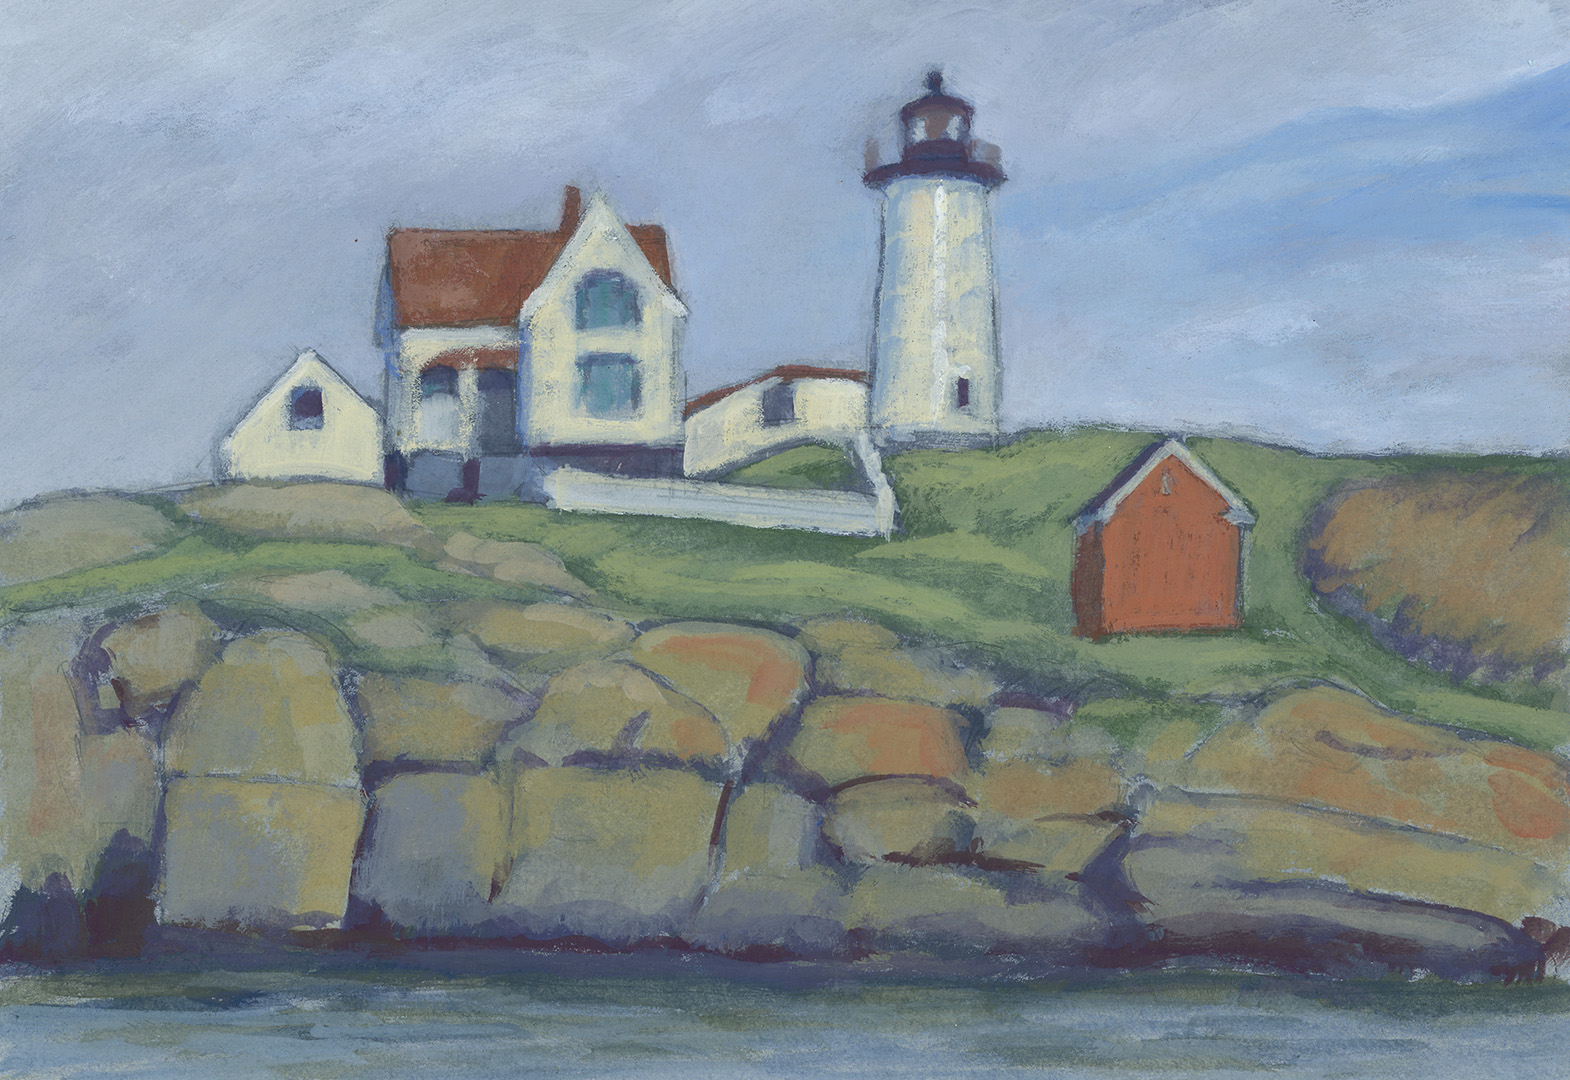  Nubble Lighthouse, ME. May 2019 